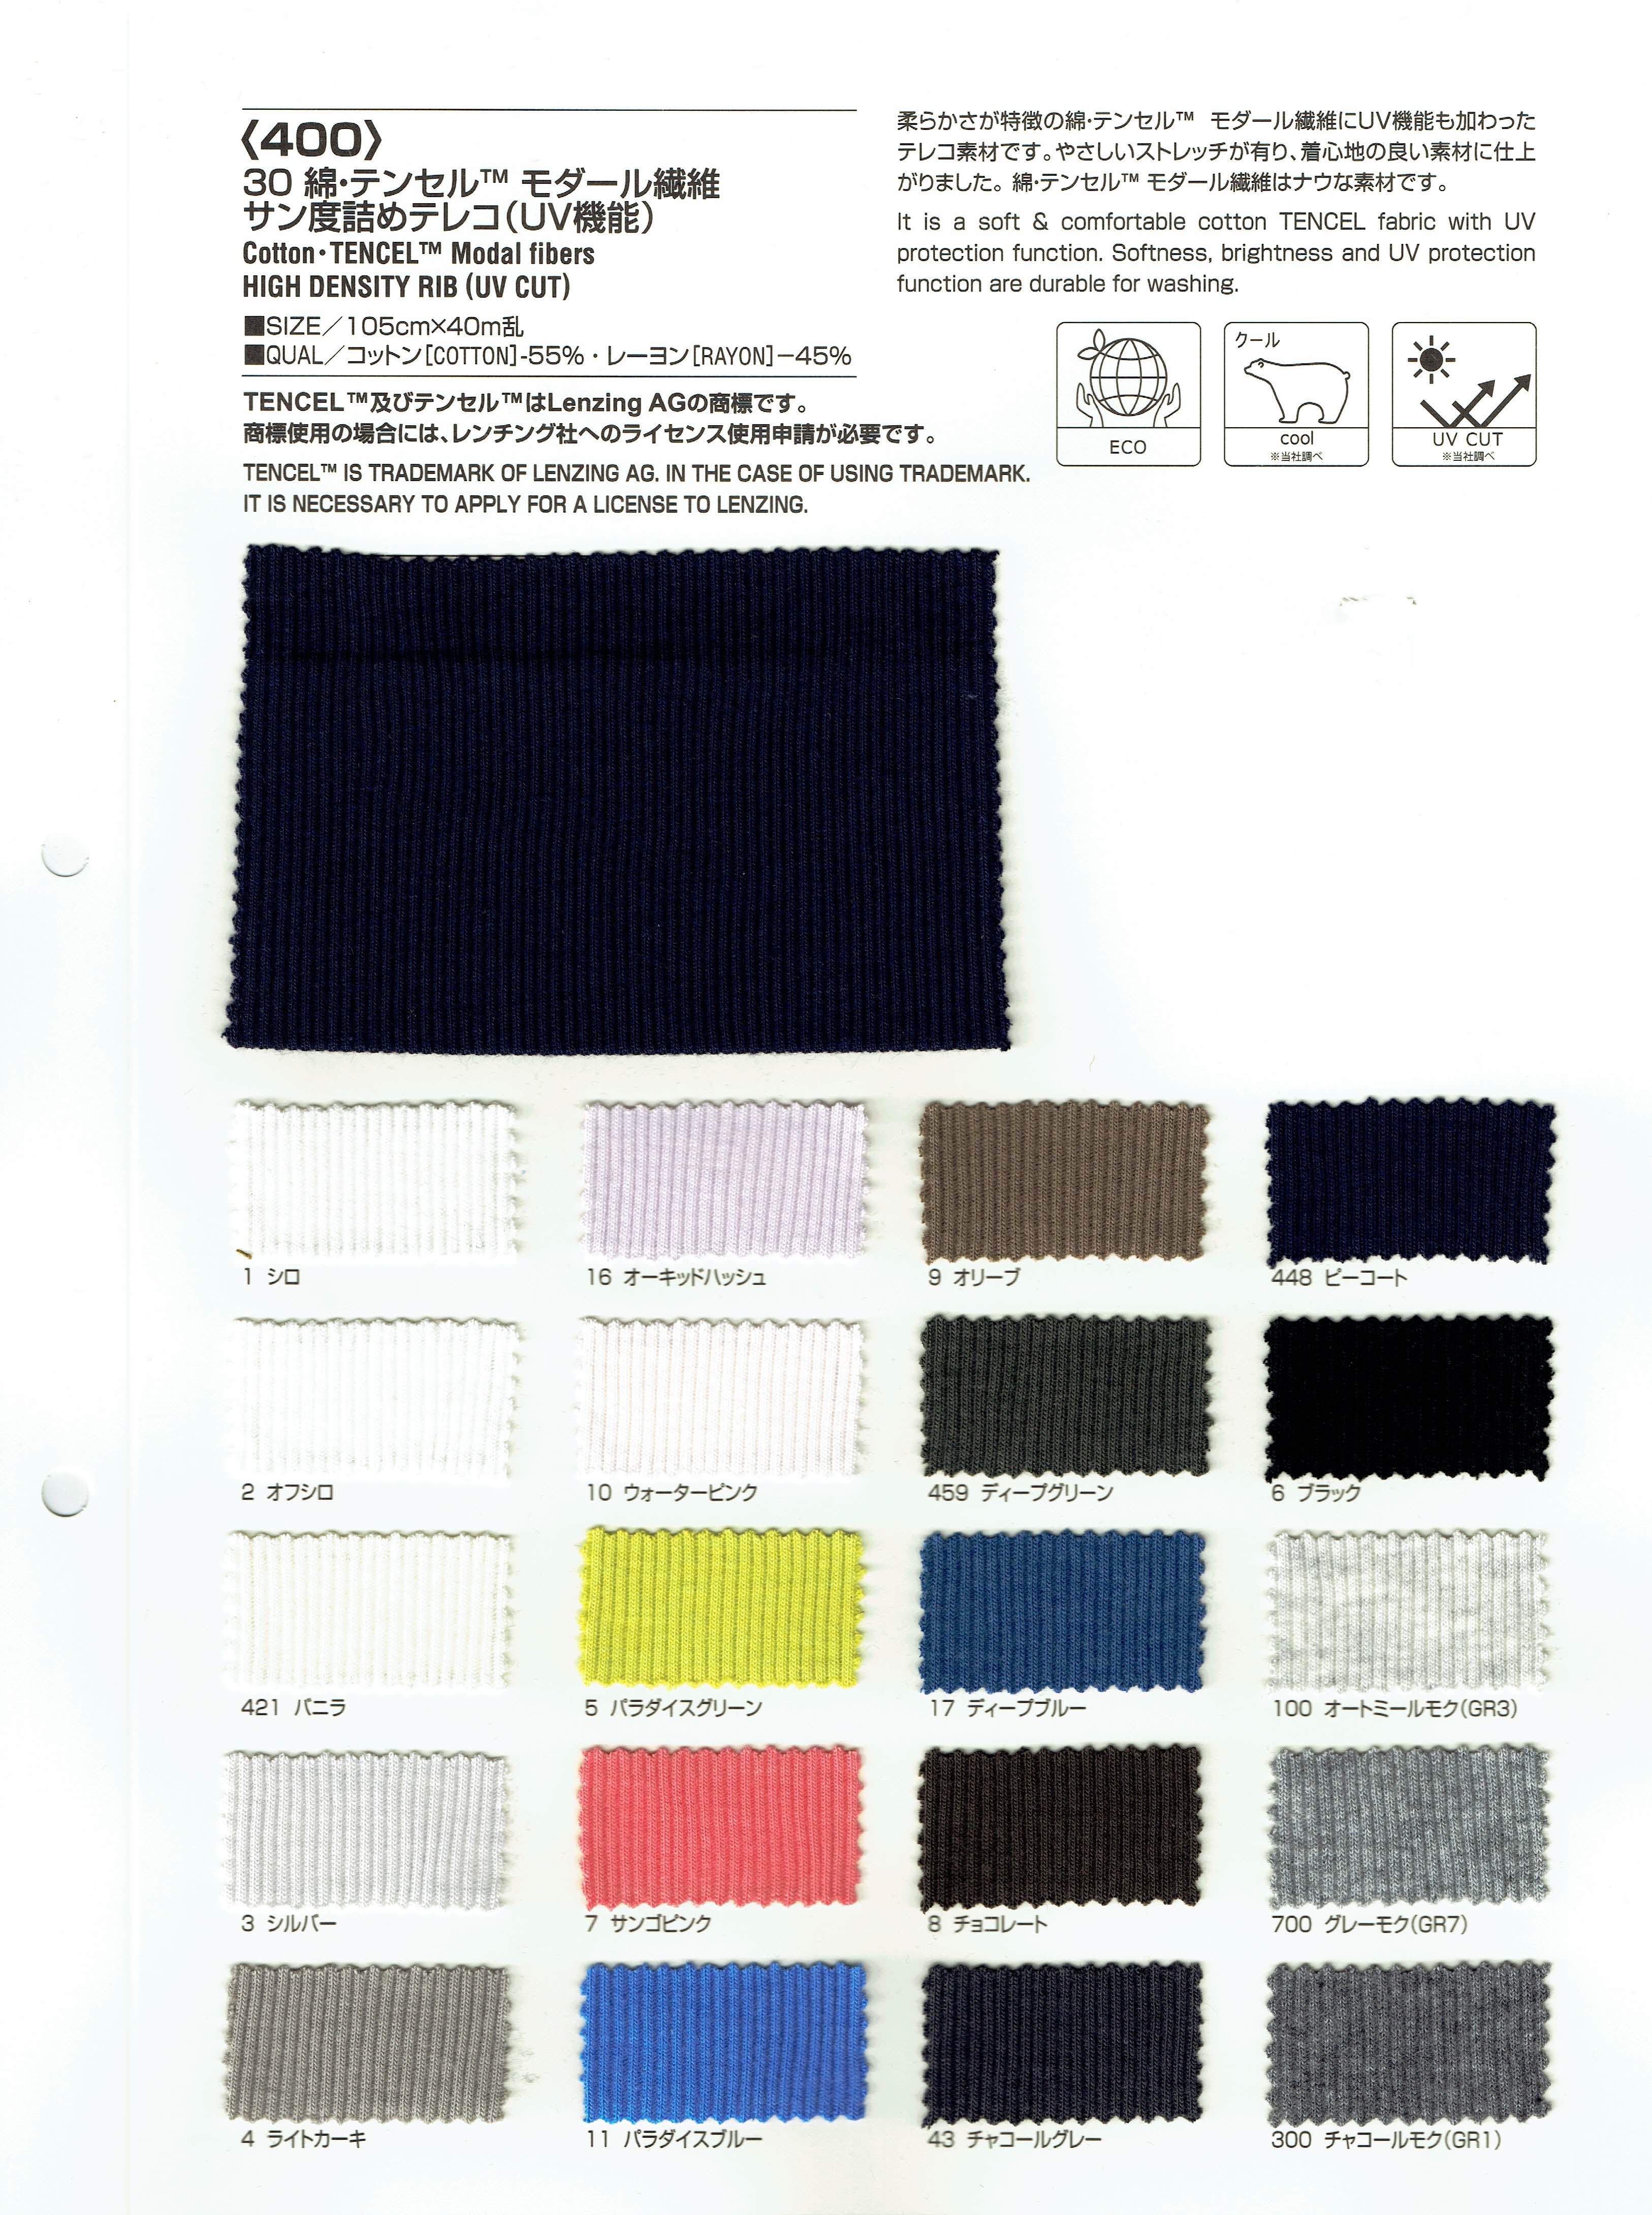 View 55% COTTON 45% RAYON[MODAL] AND/OR[WHITE/DYED/TOP DYED] KNITTED